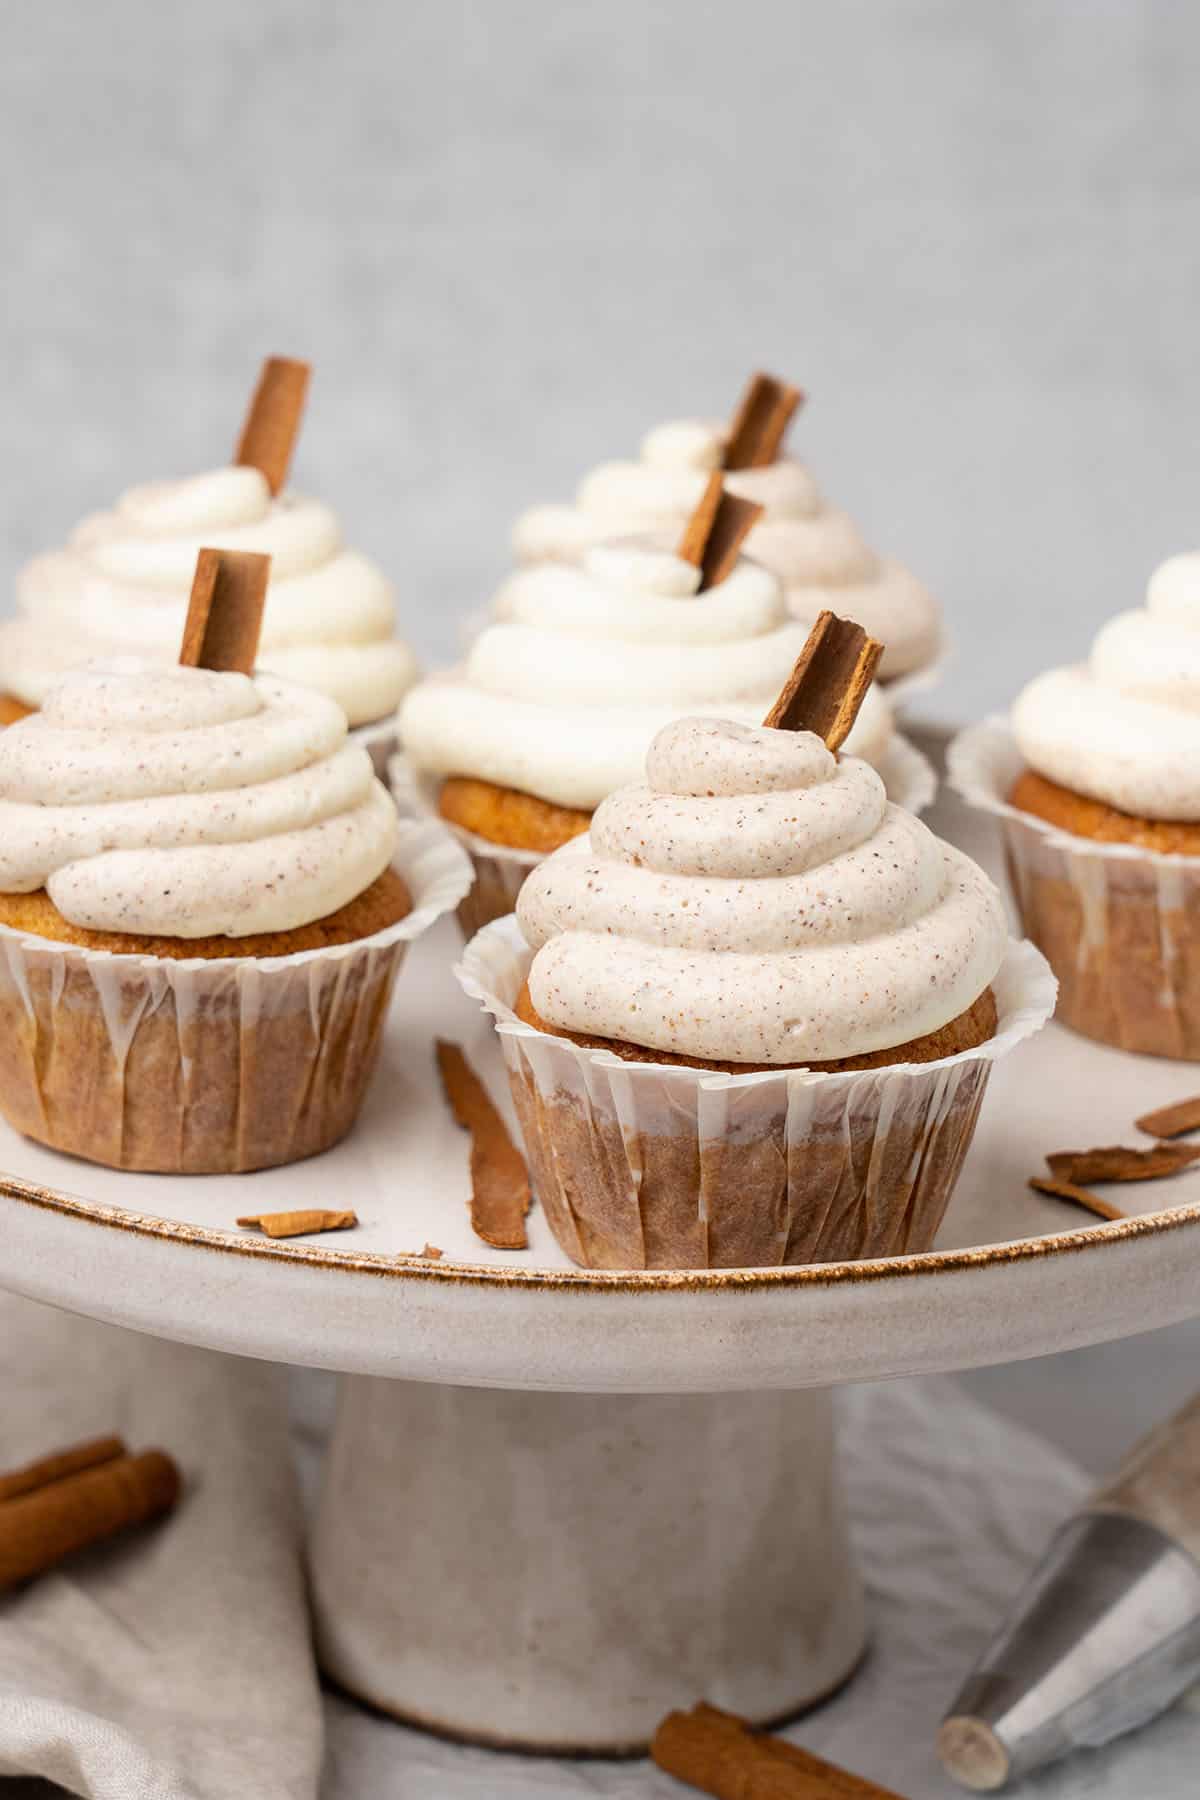 Cinnamon cupcakes on a cake stand.